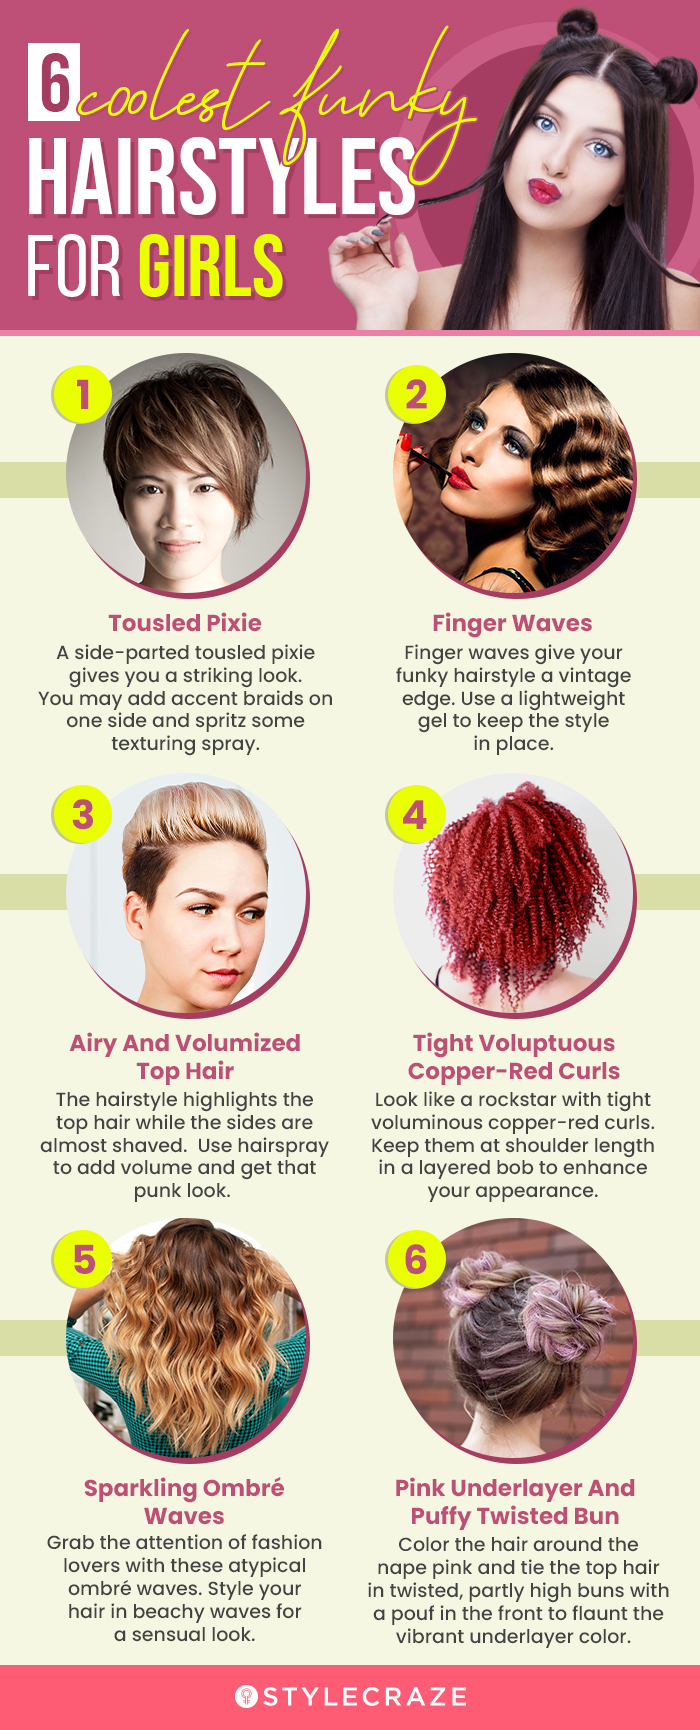 6 coolest funky hairstyles for girls (infographic)